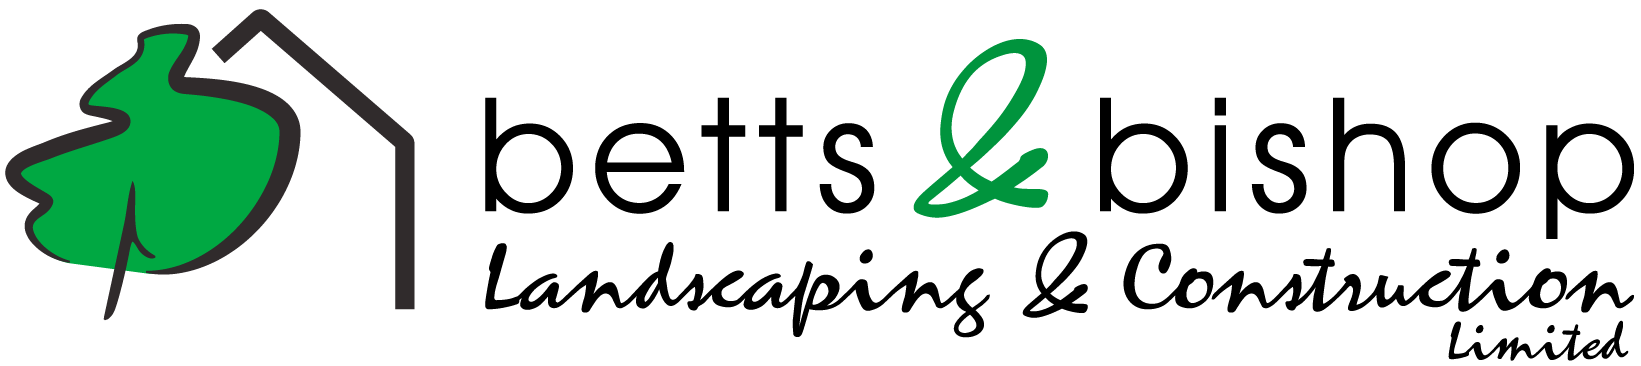 Betts & Bishop Landscaping & Construction Limited